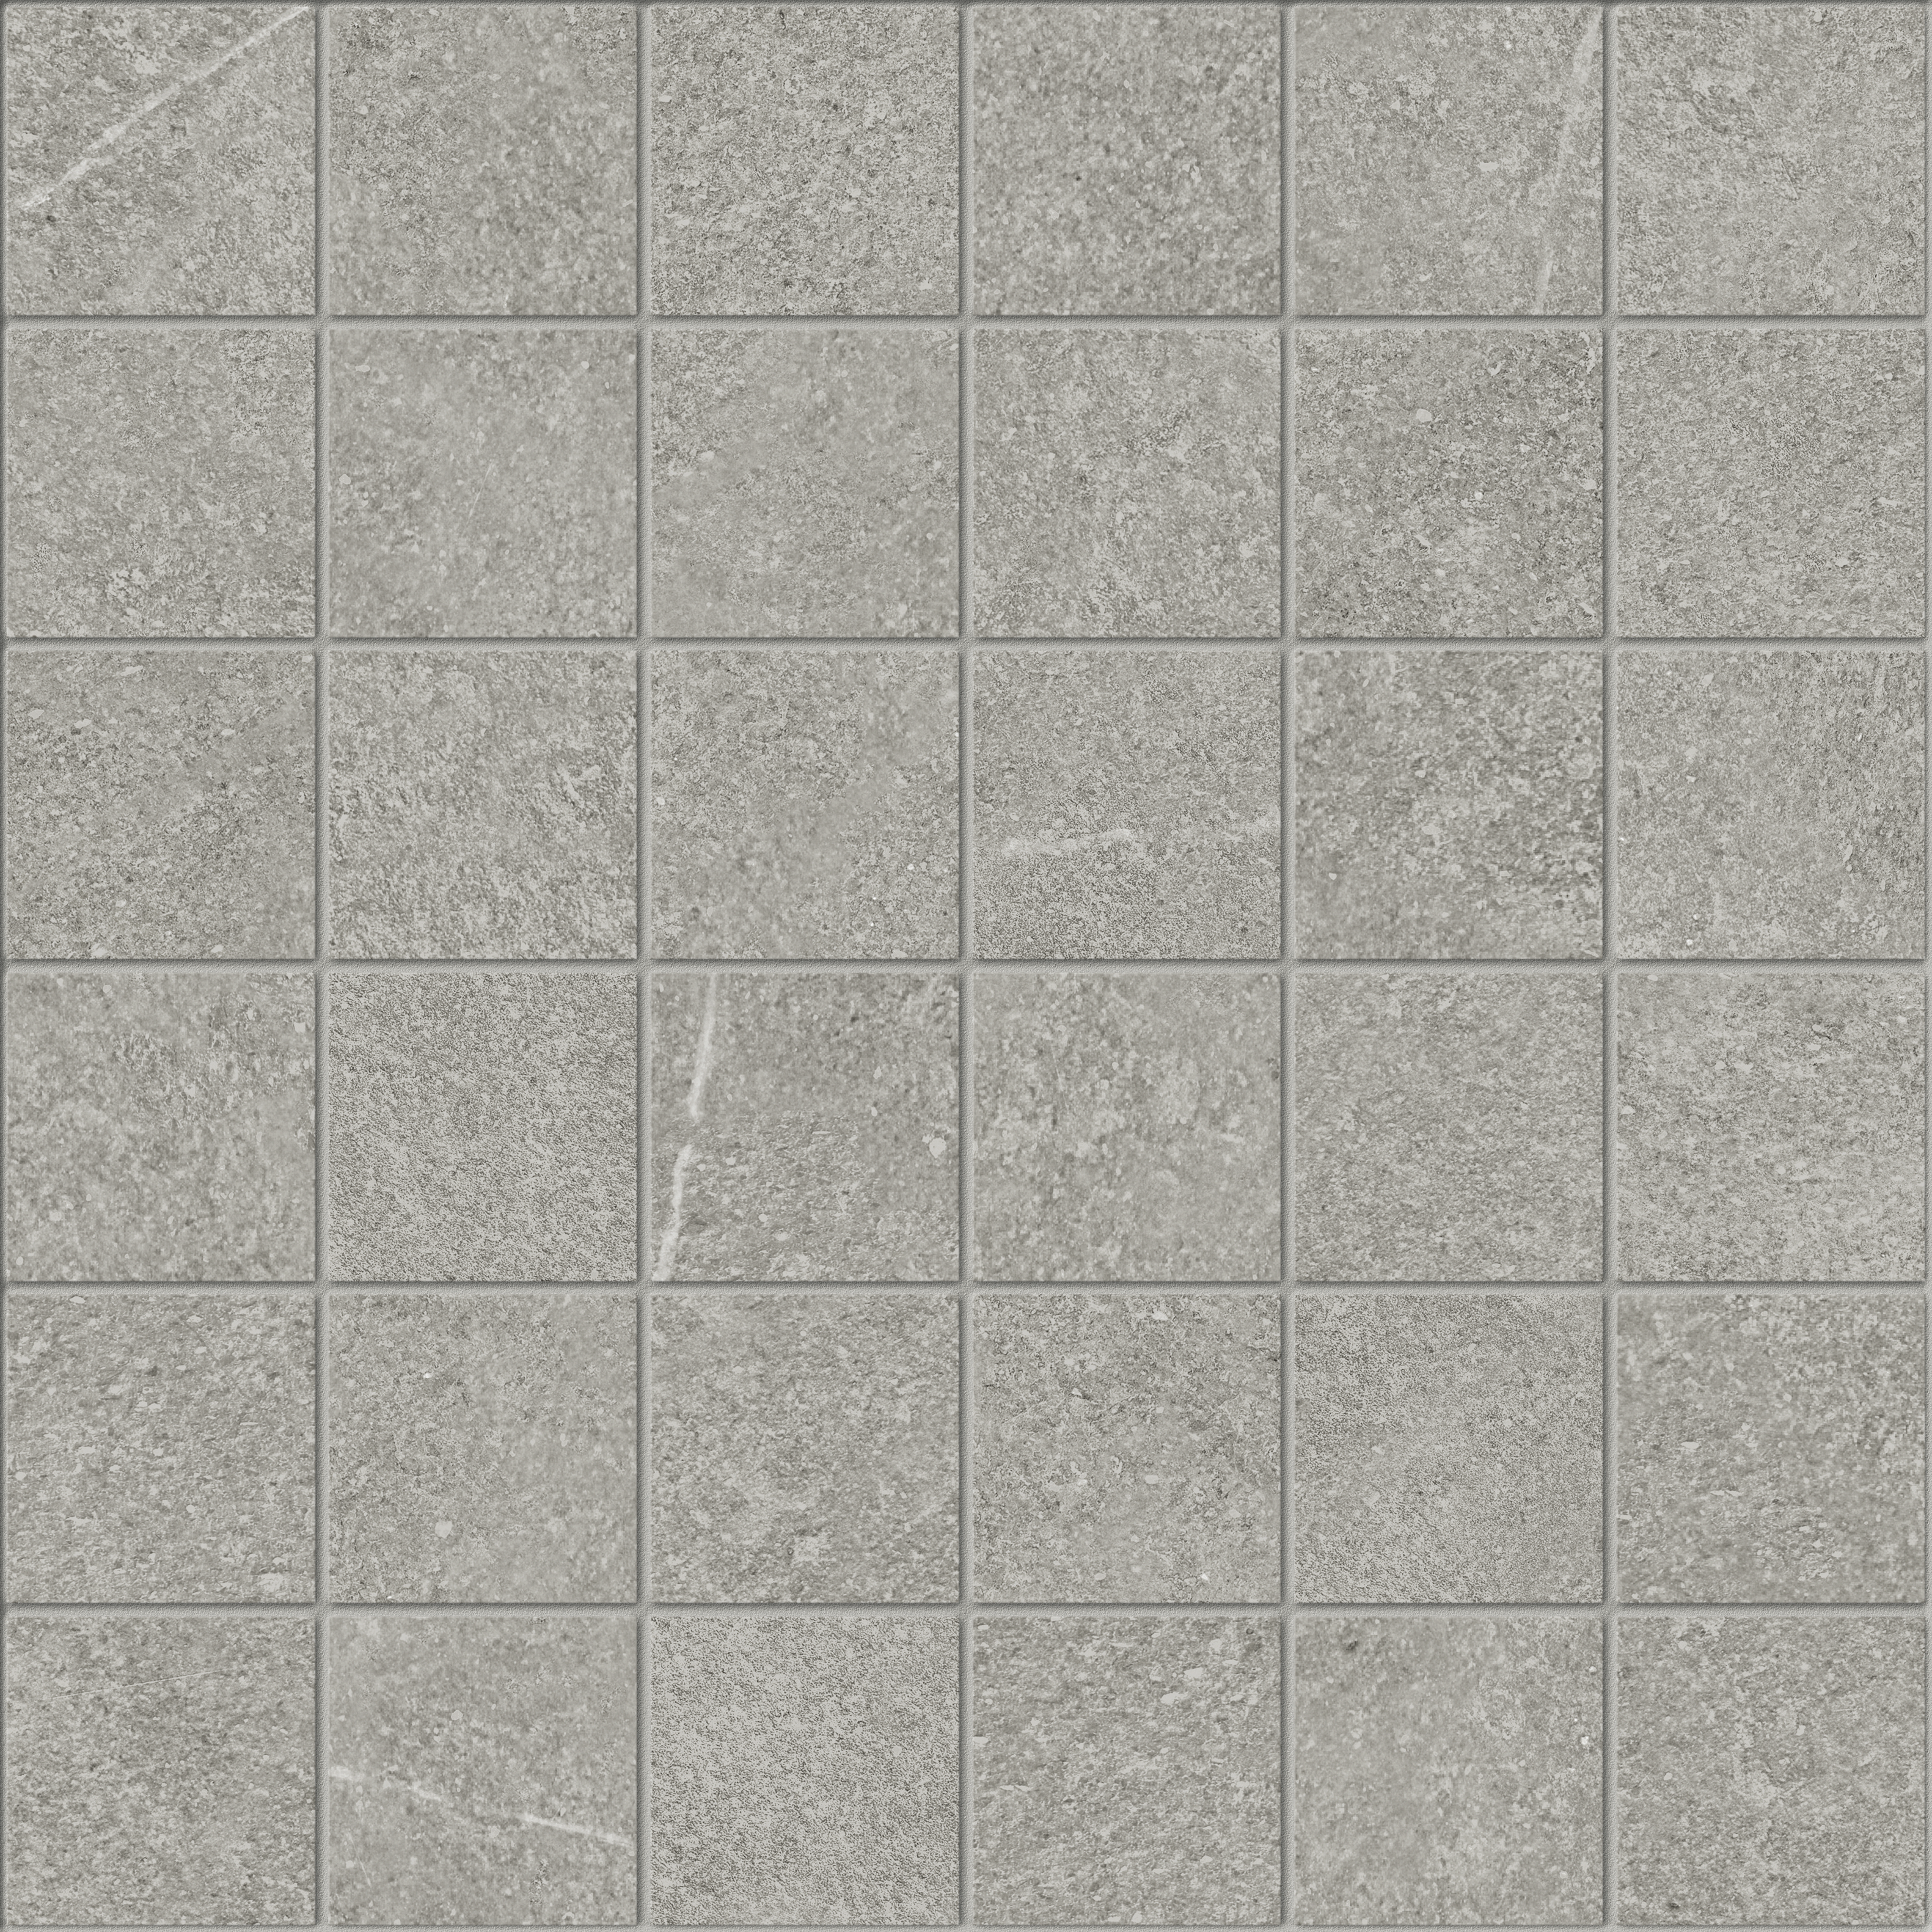 clay straight stack 2x2-inch pattern color body porcelain mosaic from mjork anatolia collection distributed by surface group international matte finish straight edge edge mesh shape